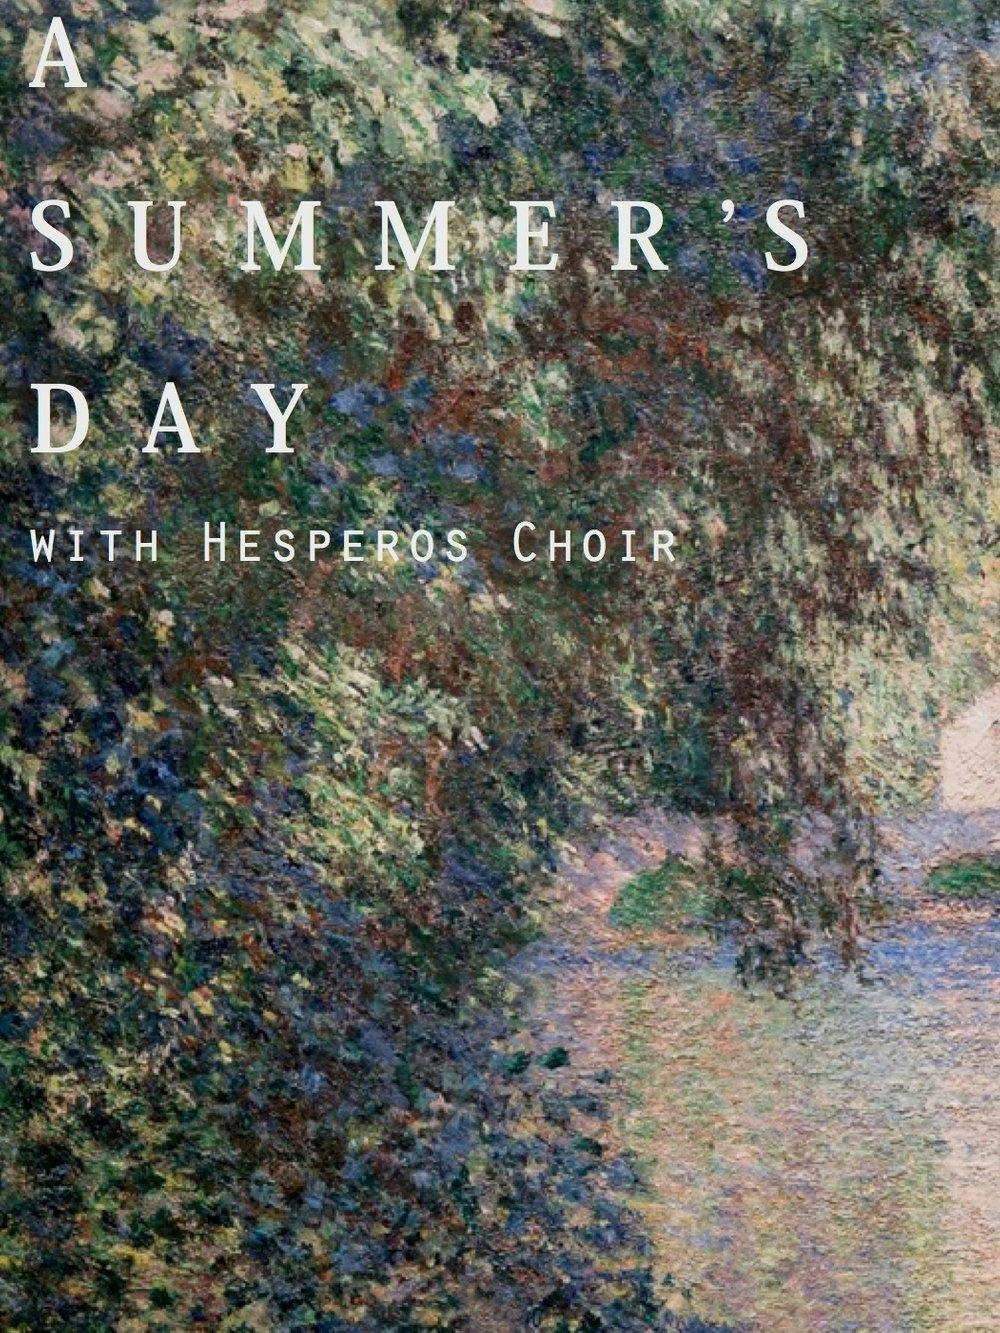 Poster for A Summer's Day by Hesperos. Trees painted in impressionist style